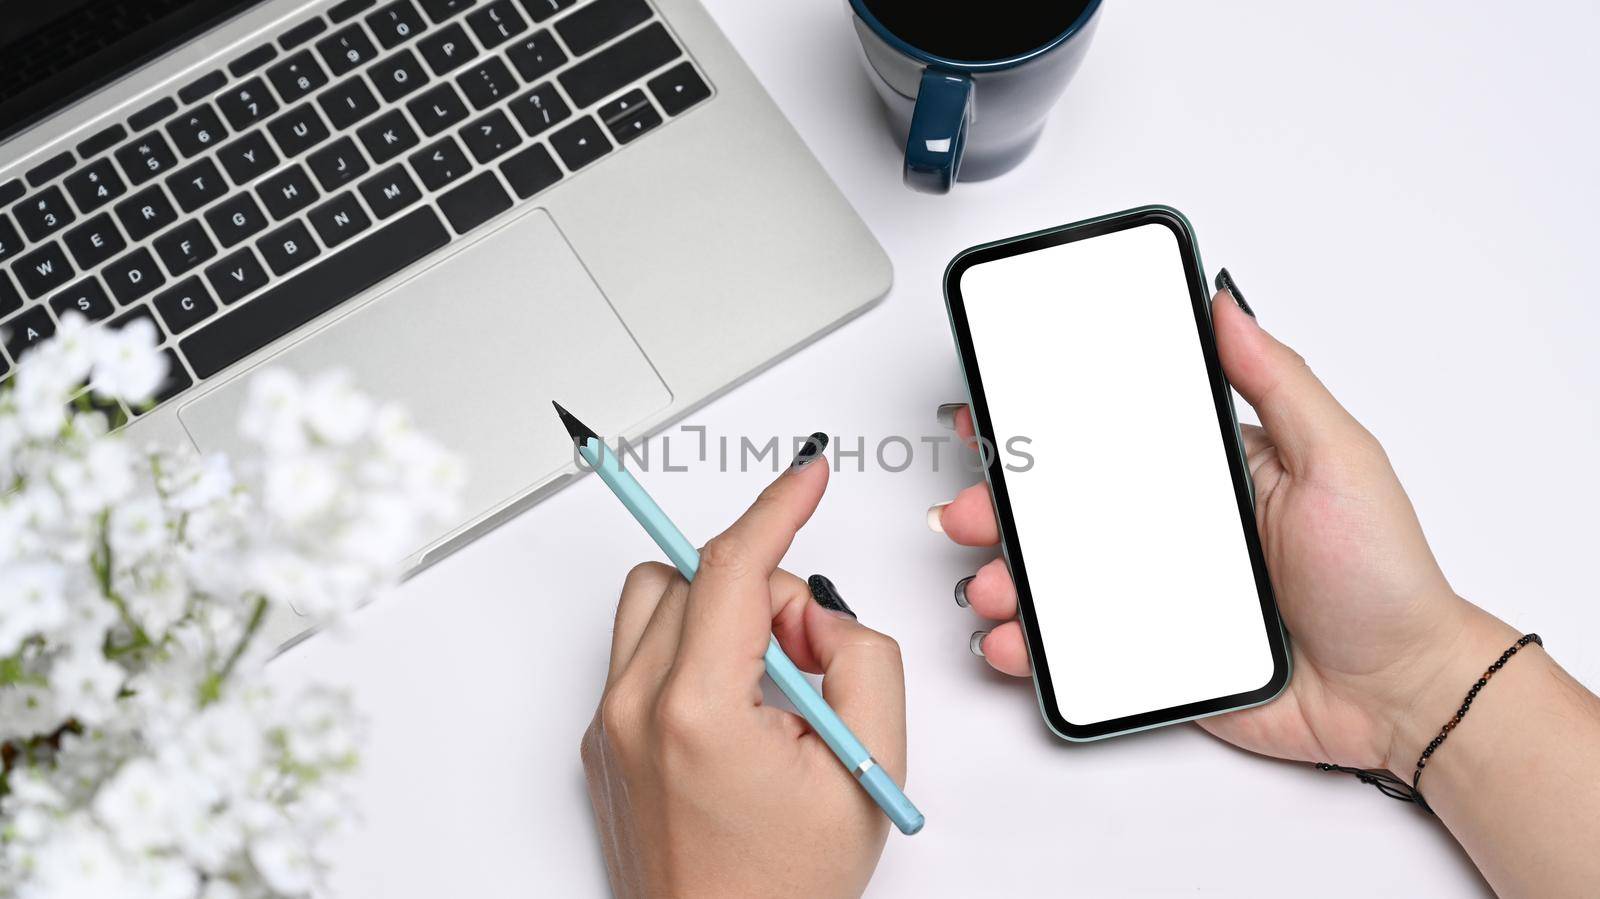 Mockup image of young woman sitting in front of laptop computer and using mobile phone.